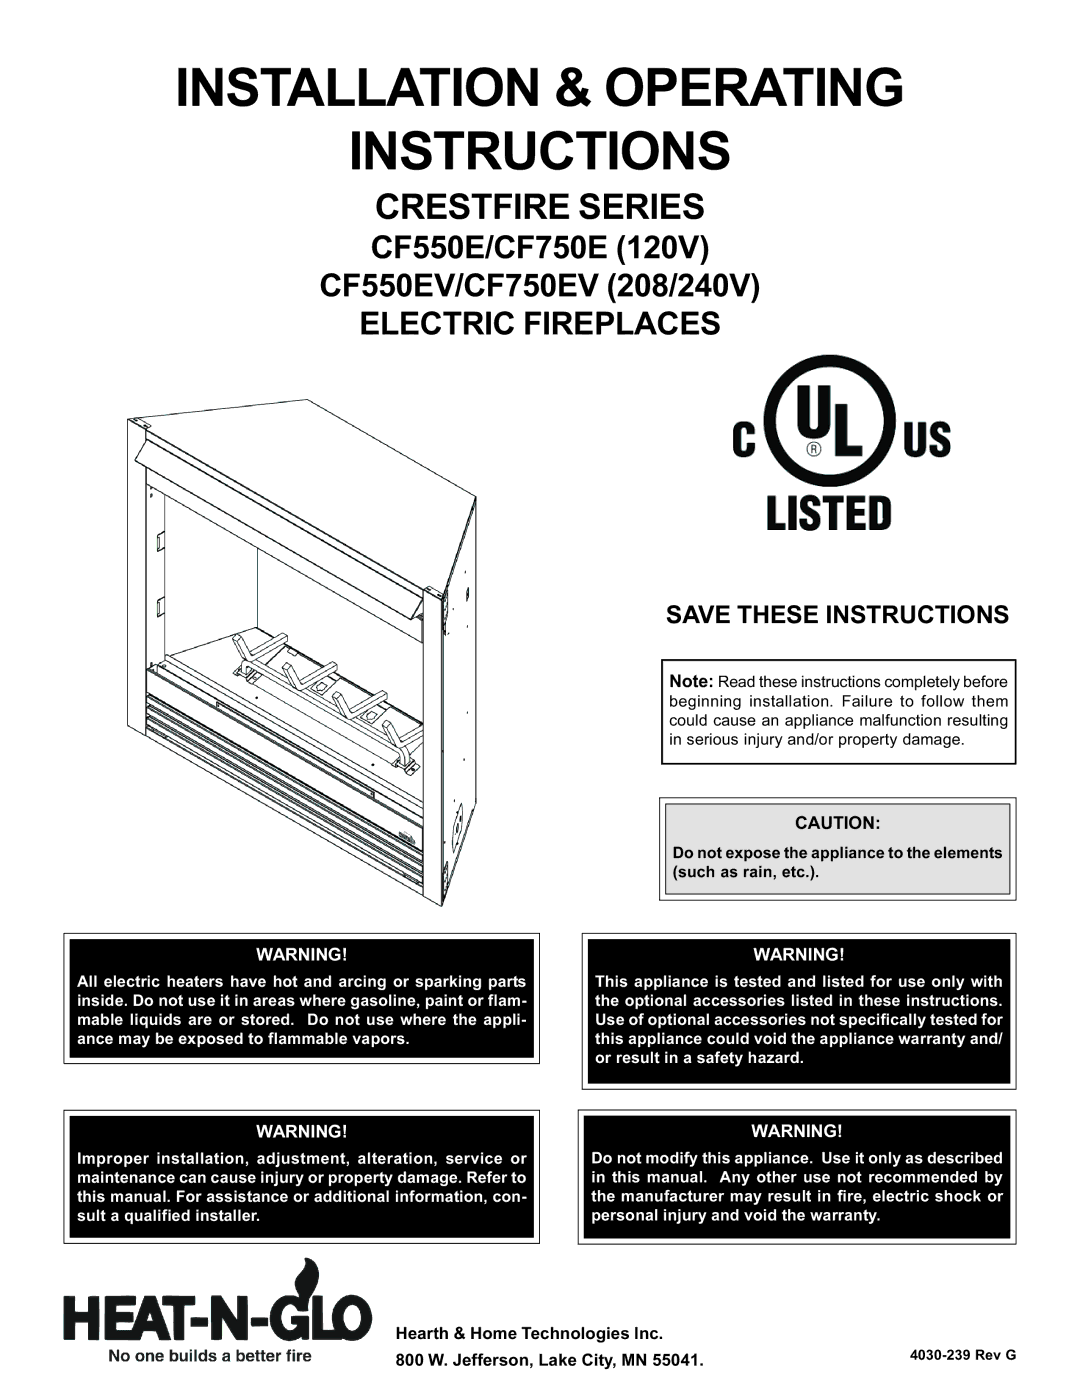 Hearth and Home Technologies CF750EV (208/240V) warranty Installation & Operating Instructions, Electric Fireplaces 